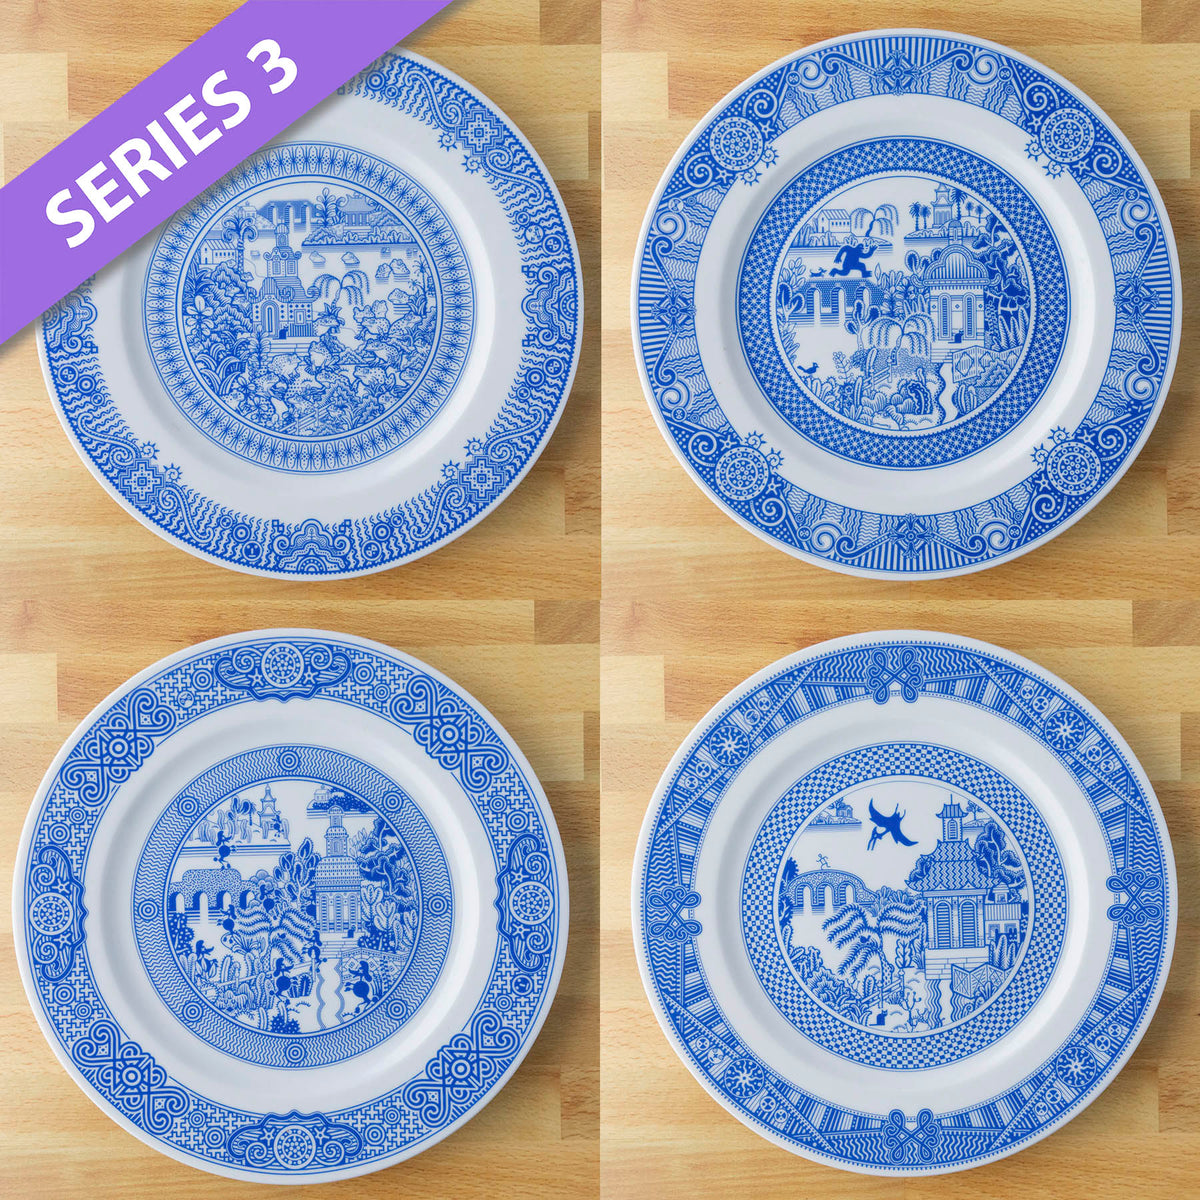 Four-Plate Set: Dinner Plates 9, 10, 11, and 12